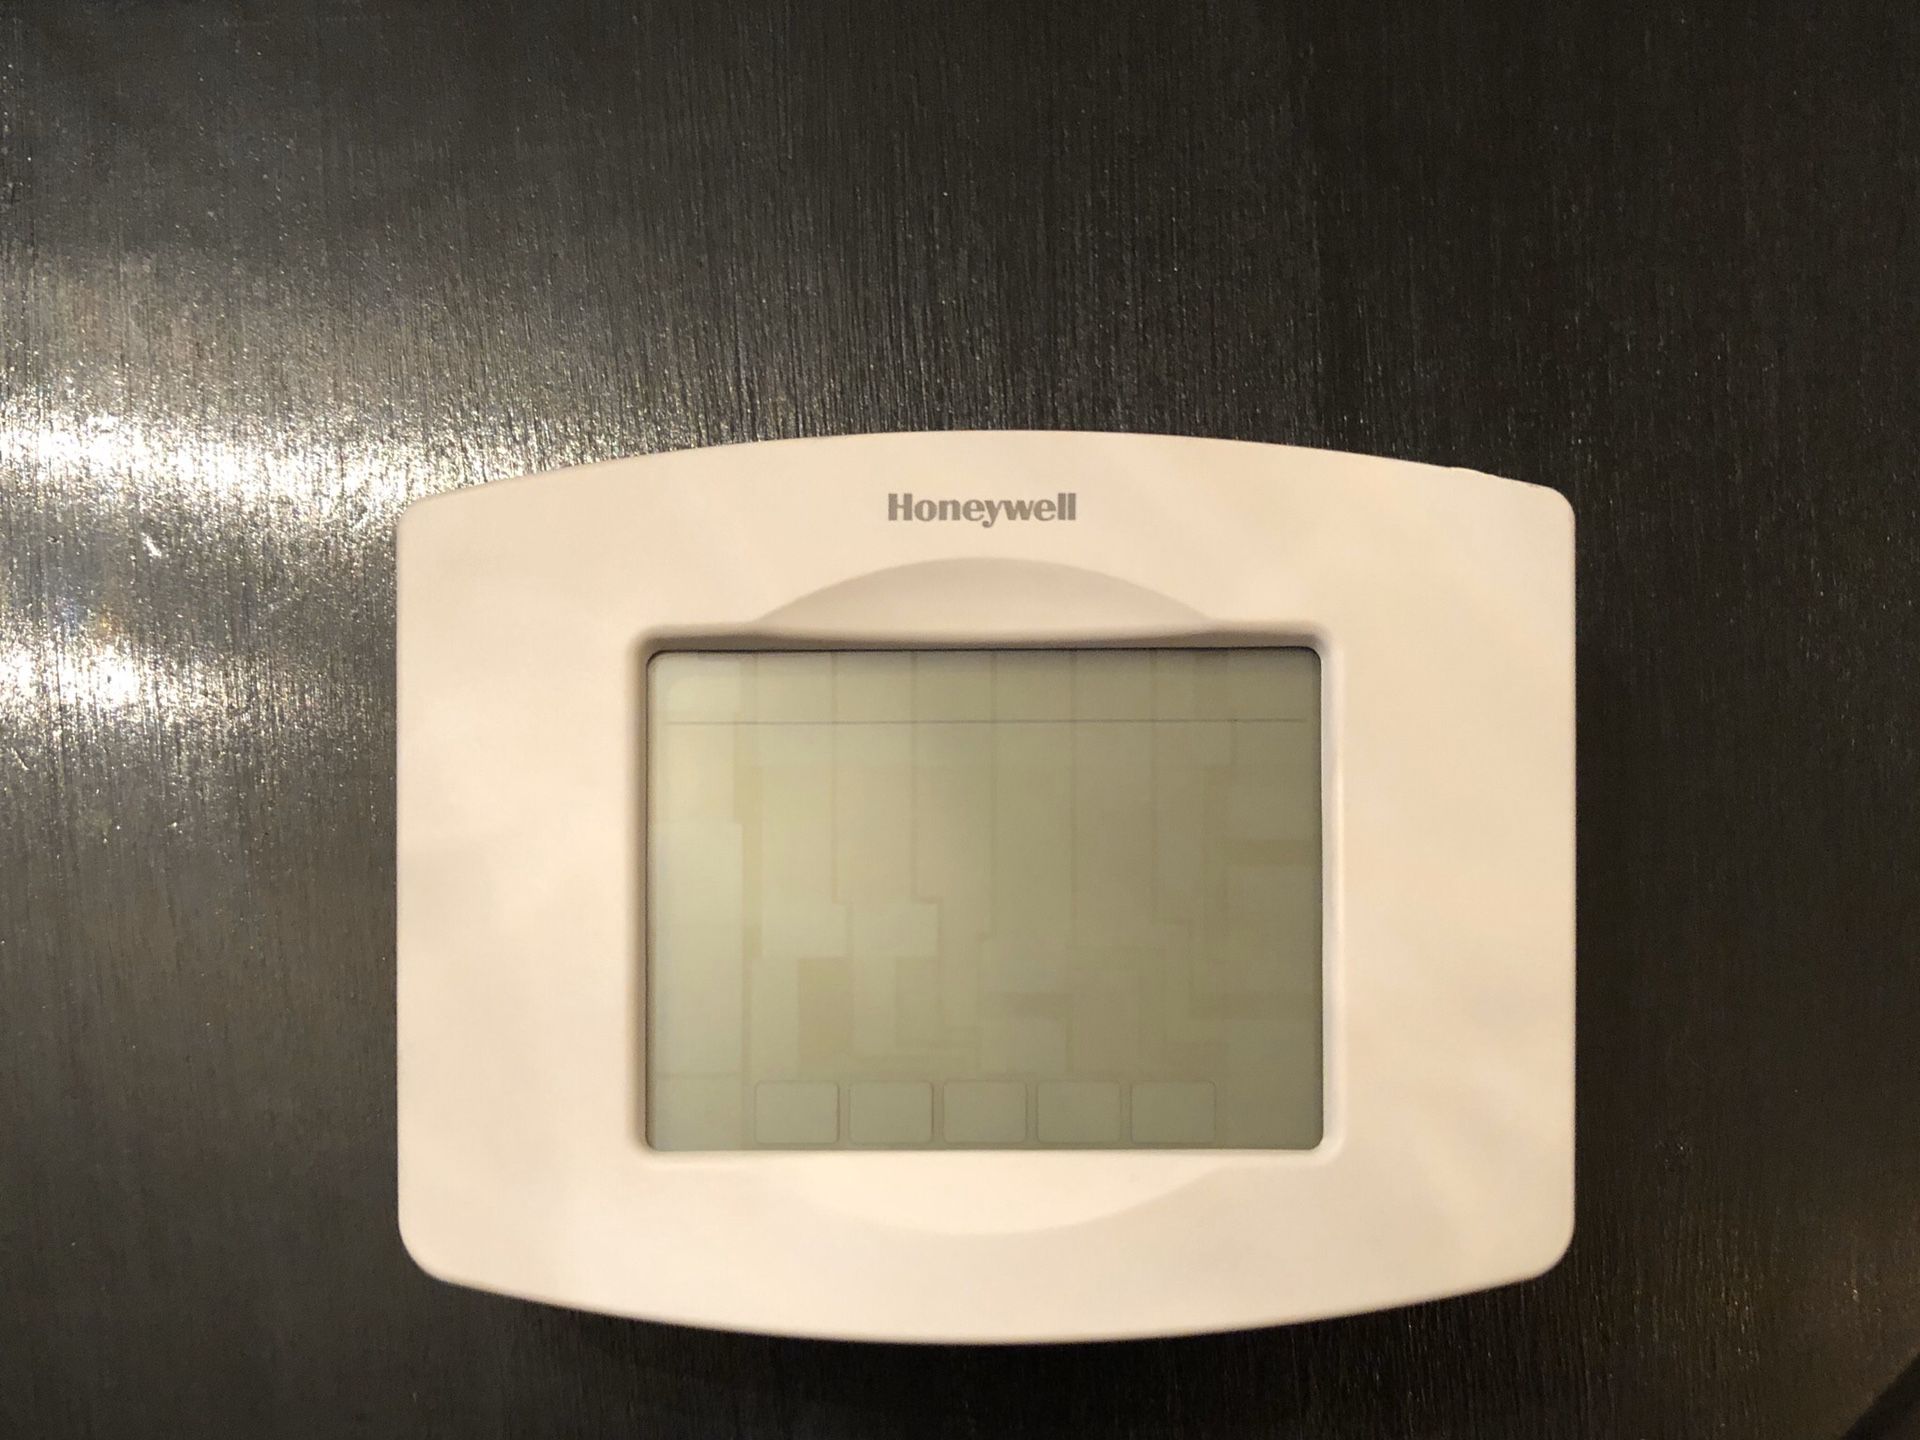 Honeywell TH8320WF Wi-Fi Touchscreen Programmable Digital Thermostat